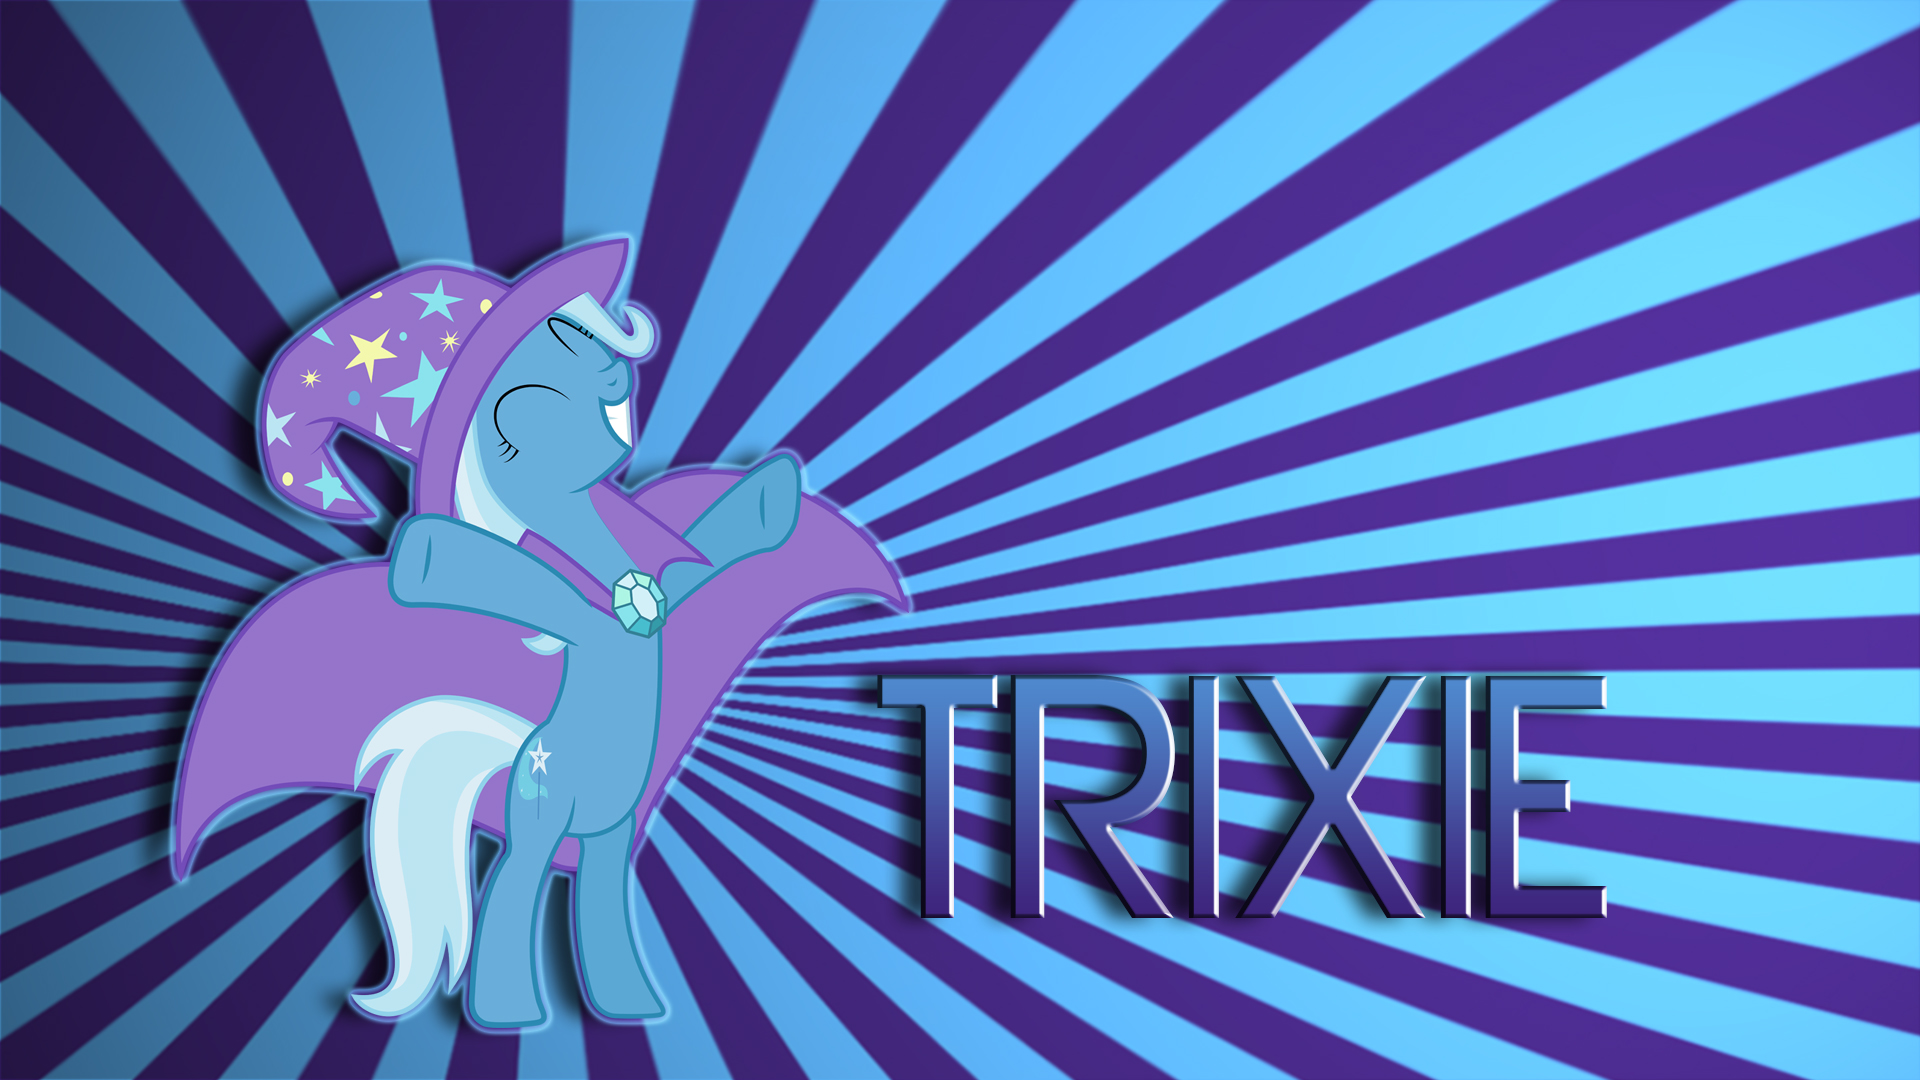 Trixie starburst by BronyYAY123 and Kired25